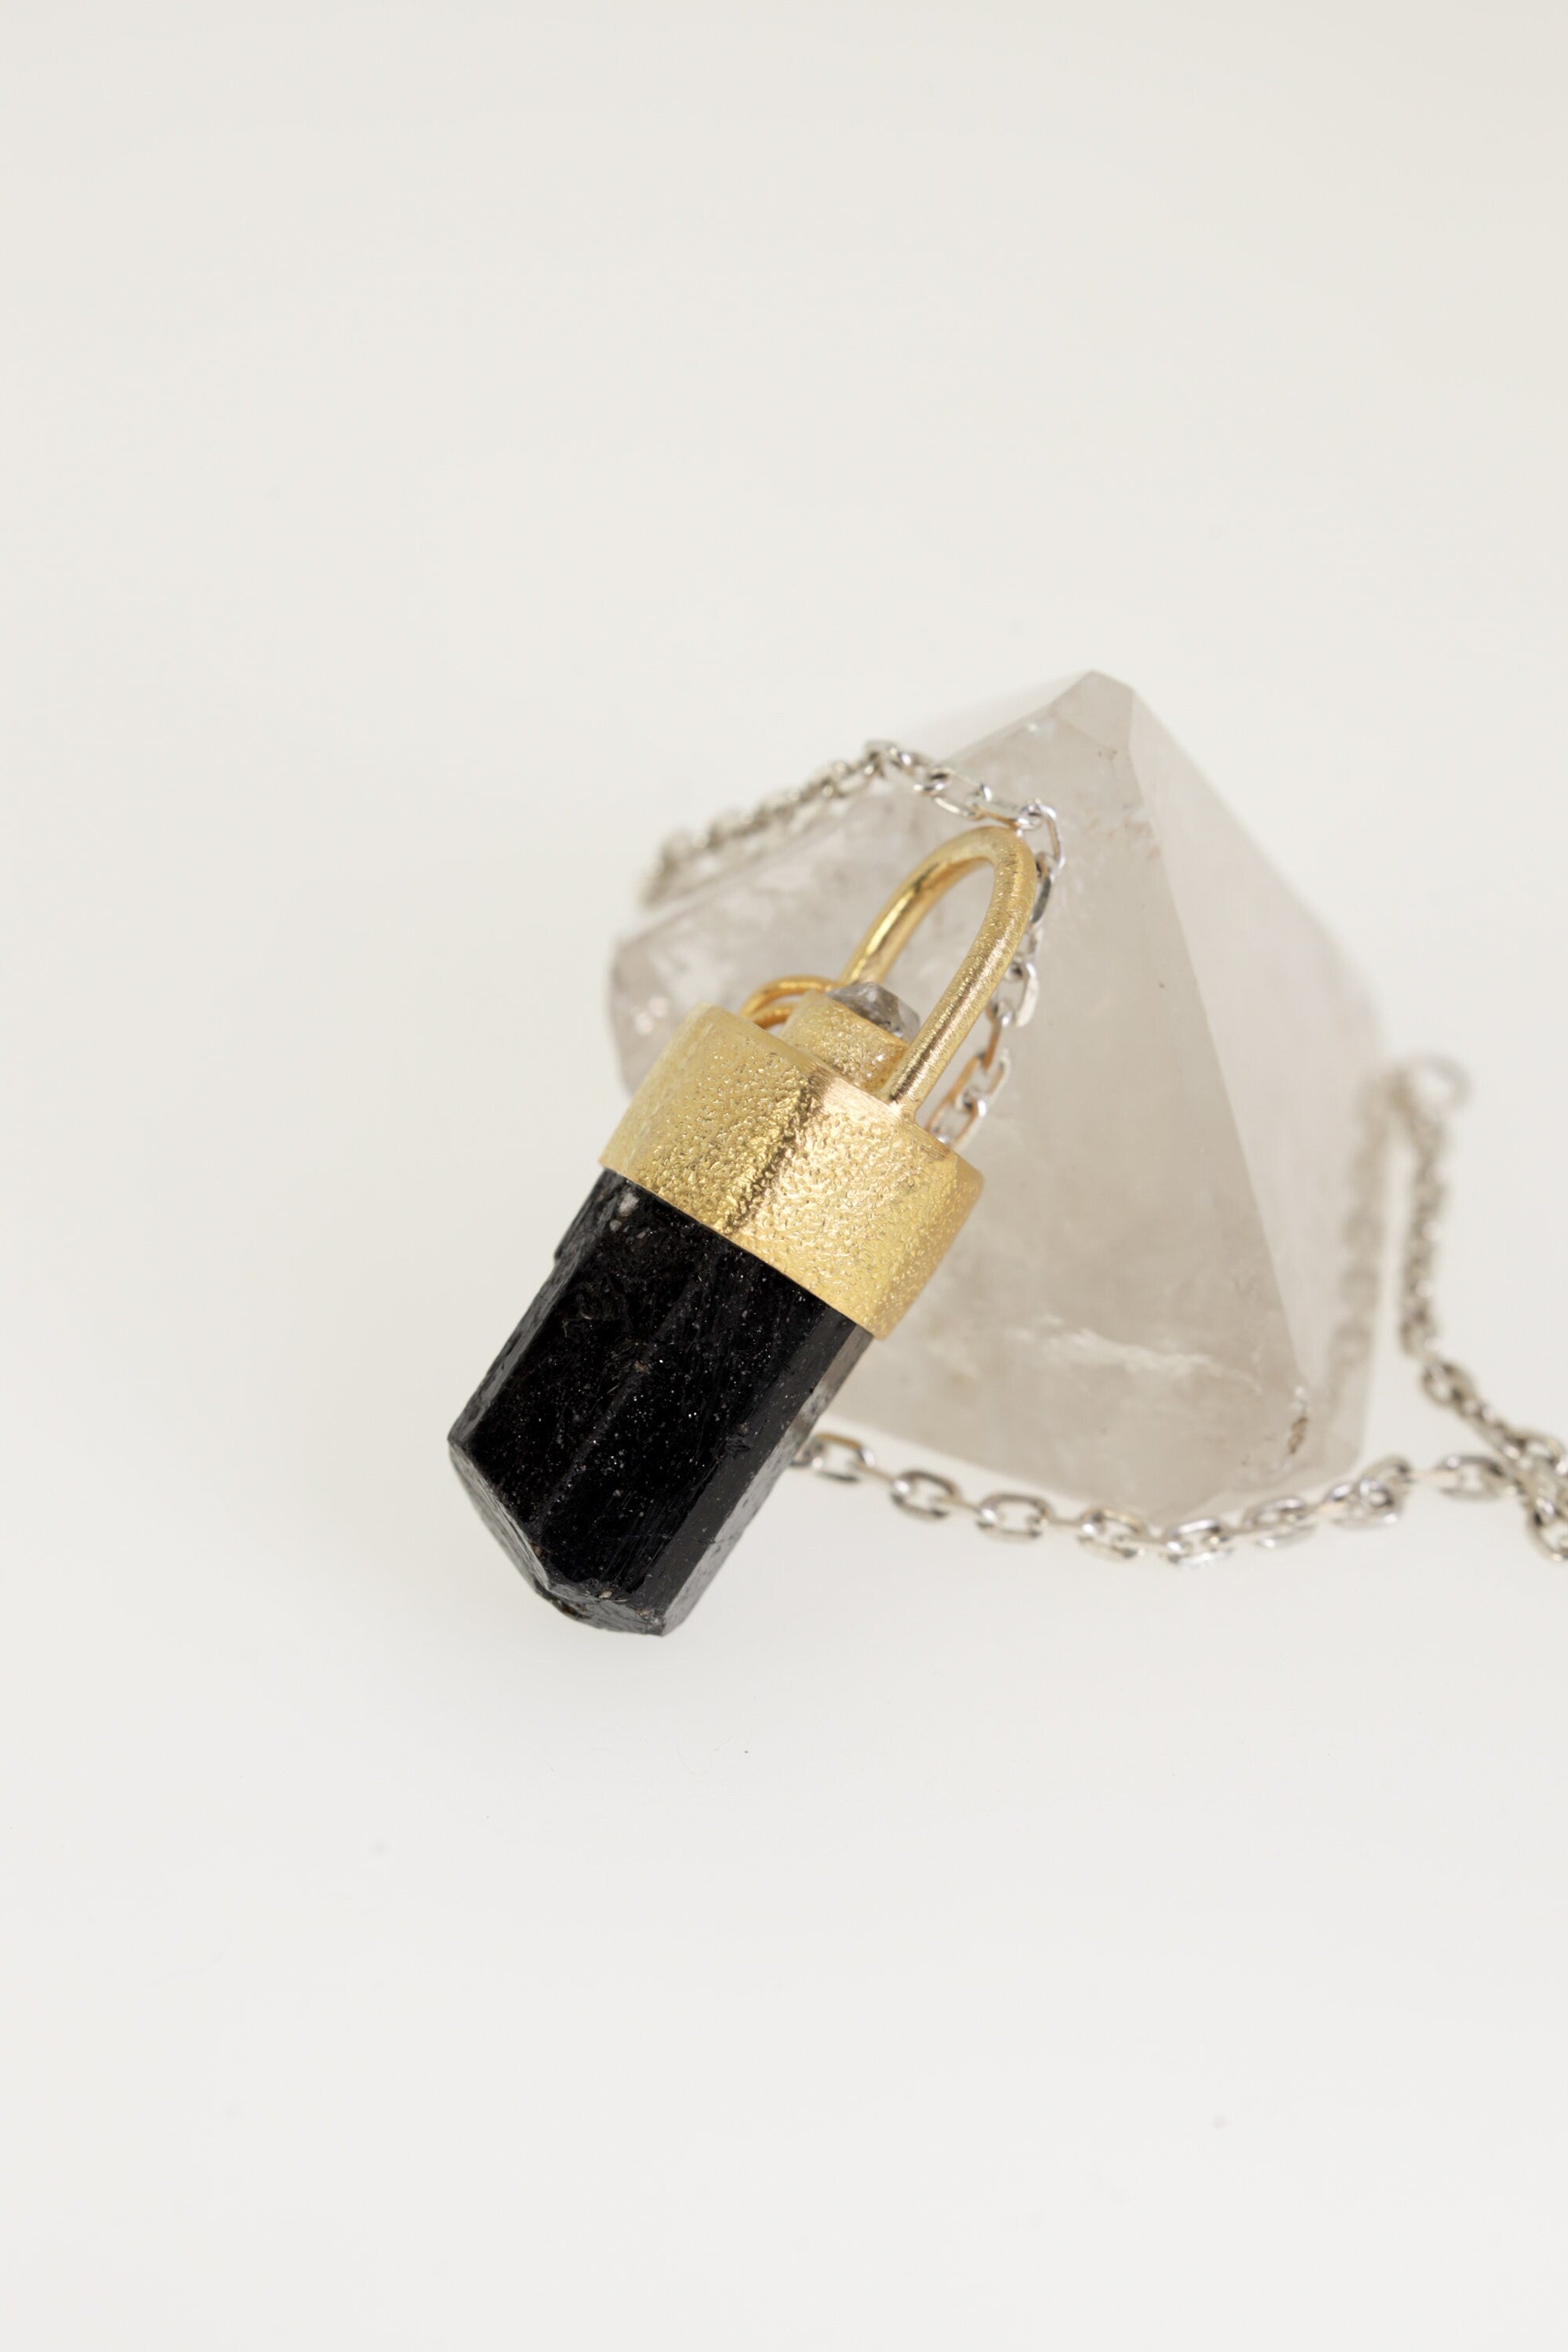 Midnight Sparkle: Gold-Plated Sterling Silver Pendant with Himalayan Terminated Brown Dravite Tourmaline and Diamond - Sand Texture Finish